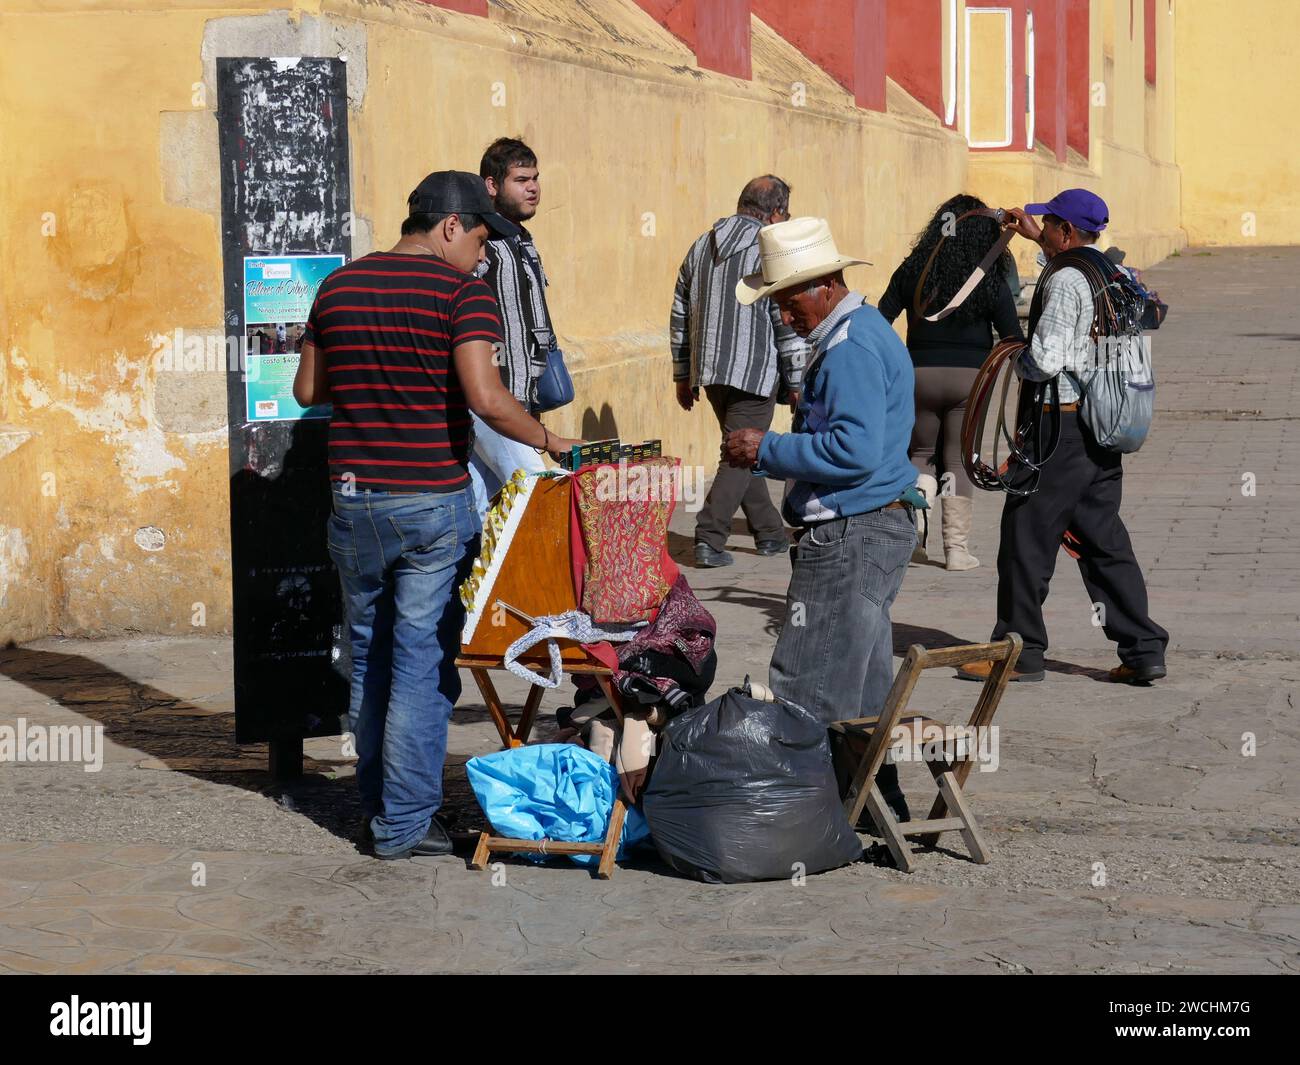 Sellers offering their wares to passerby in main square of San Cristobal de Las Casas Mexico Stock Photo